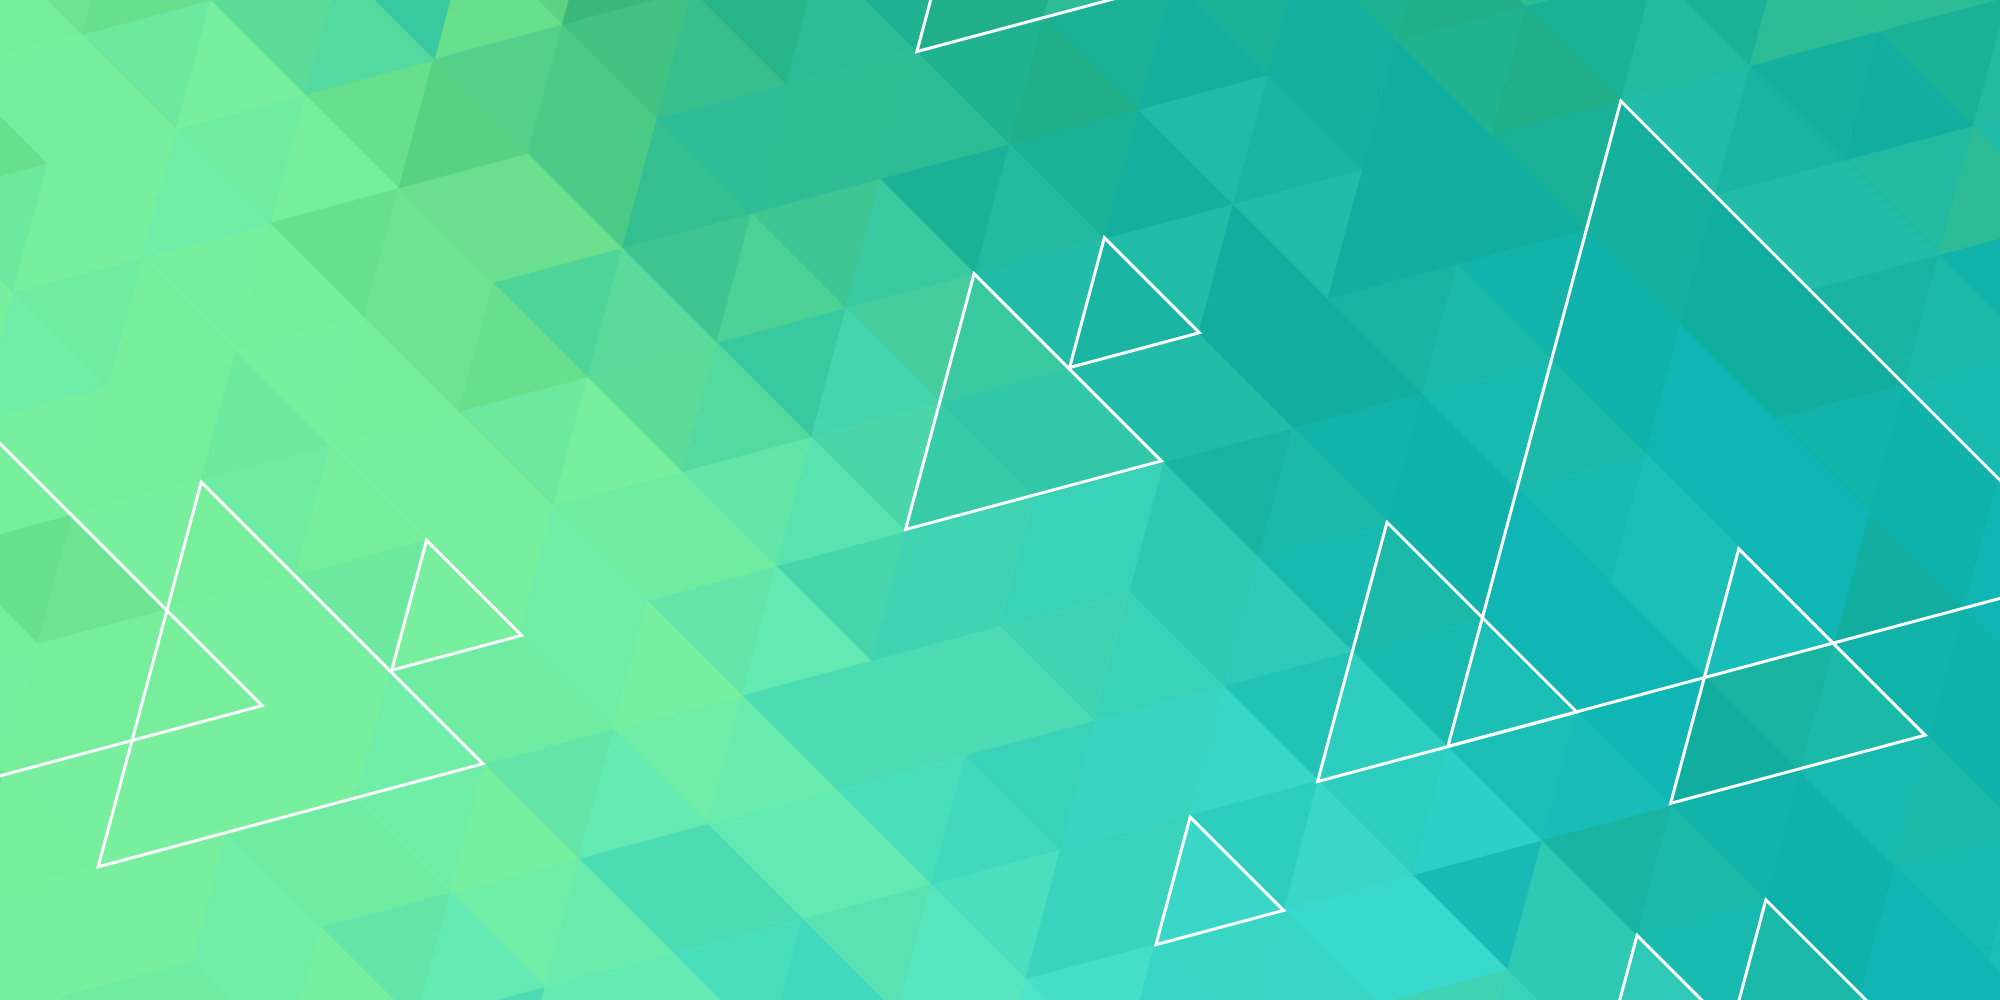 Blue green and teal pattern of triangles